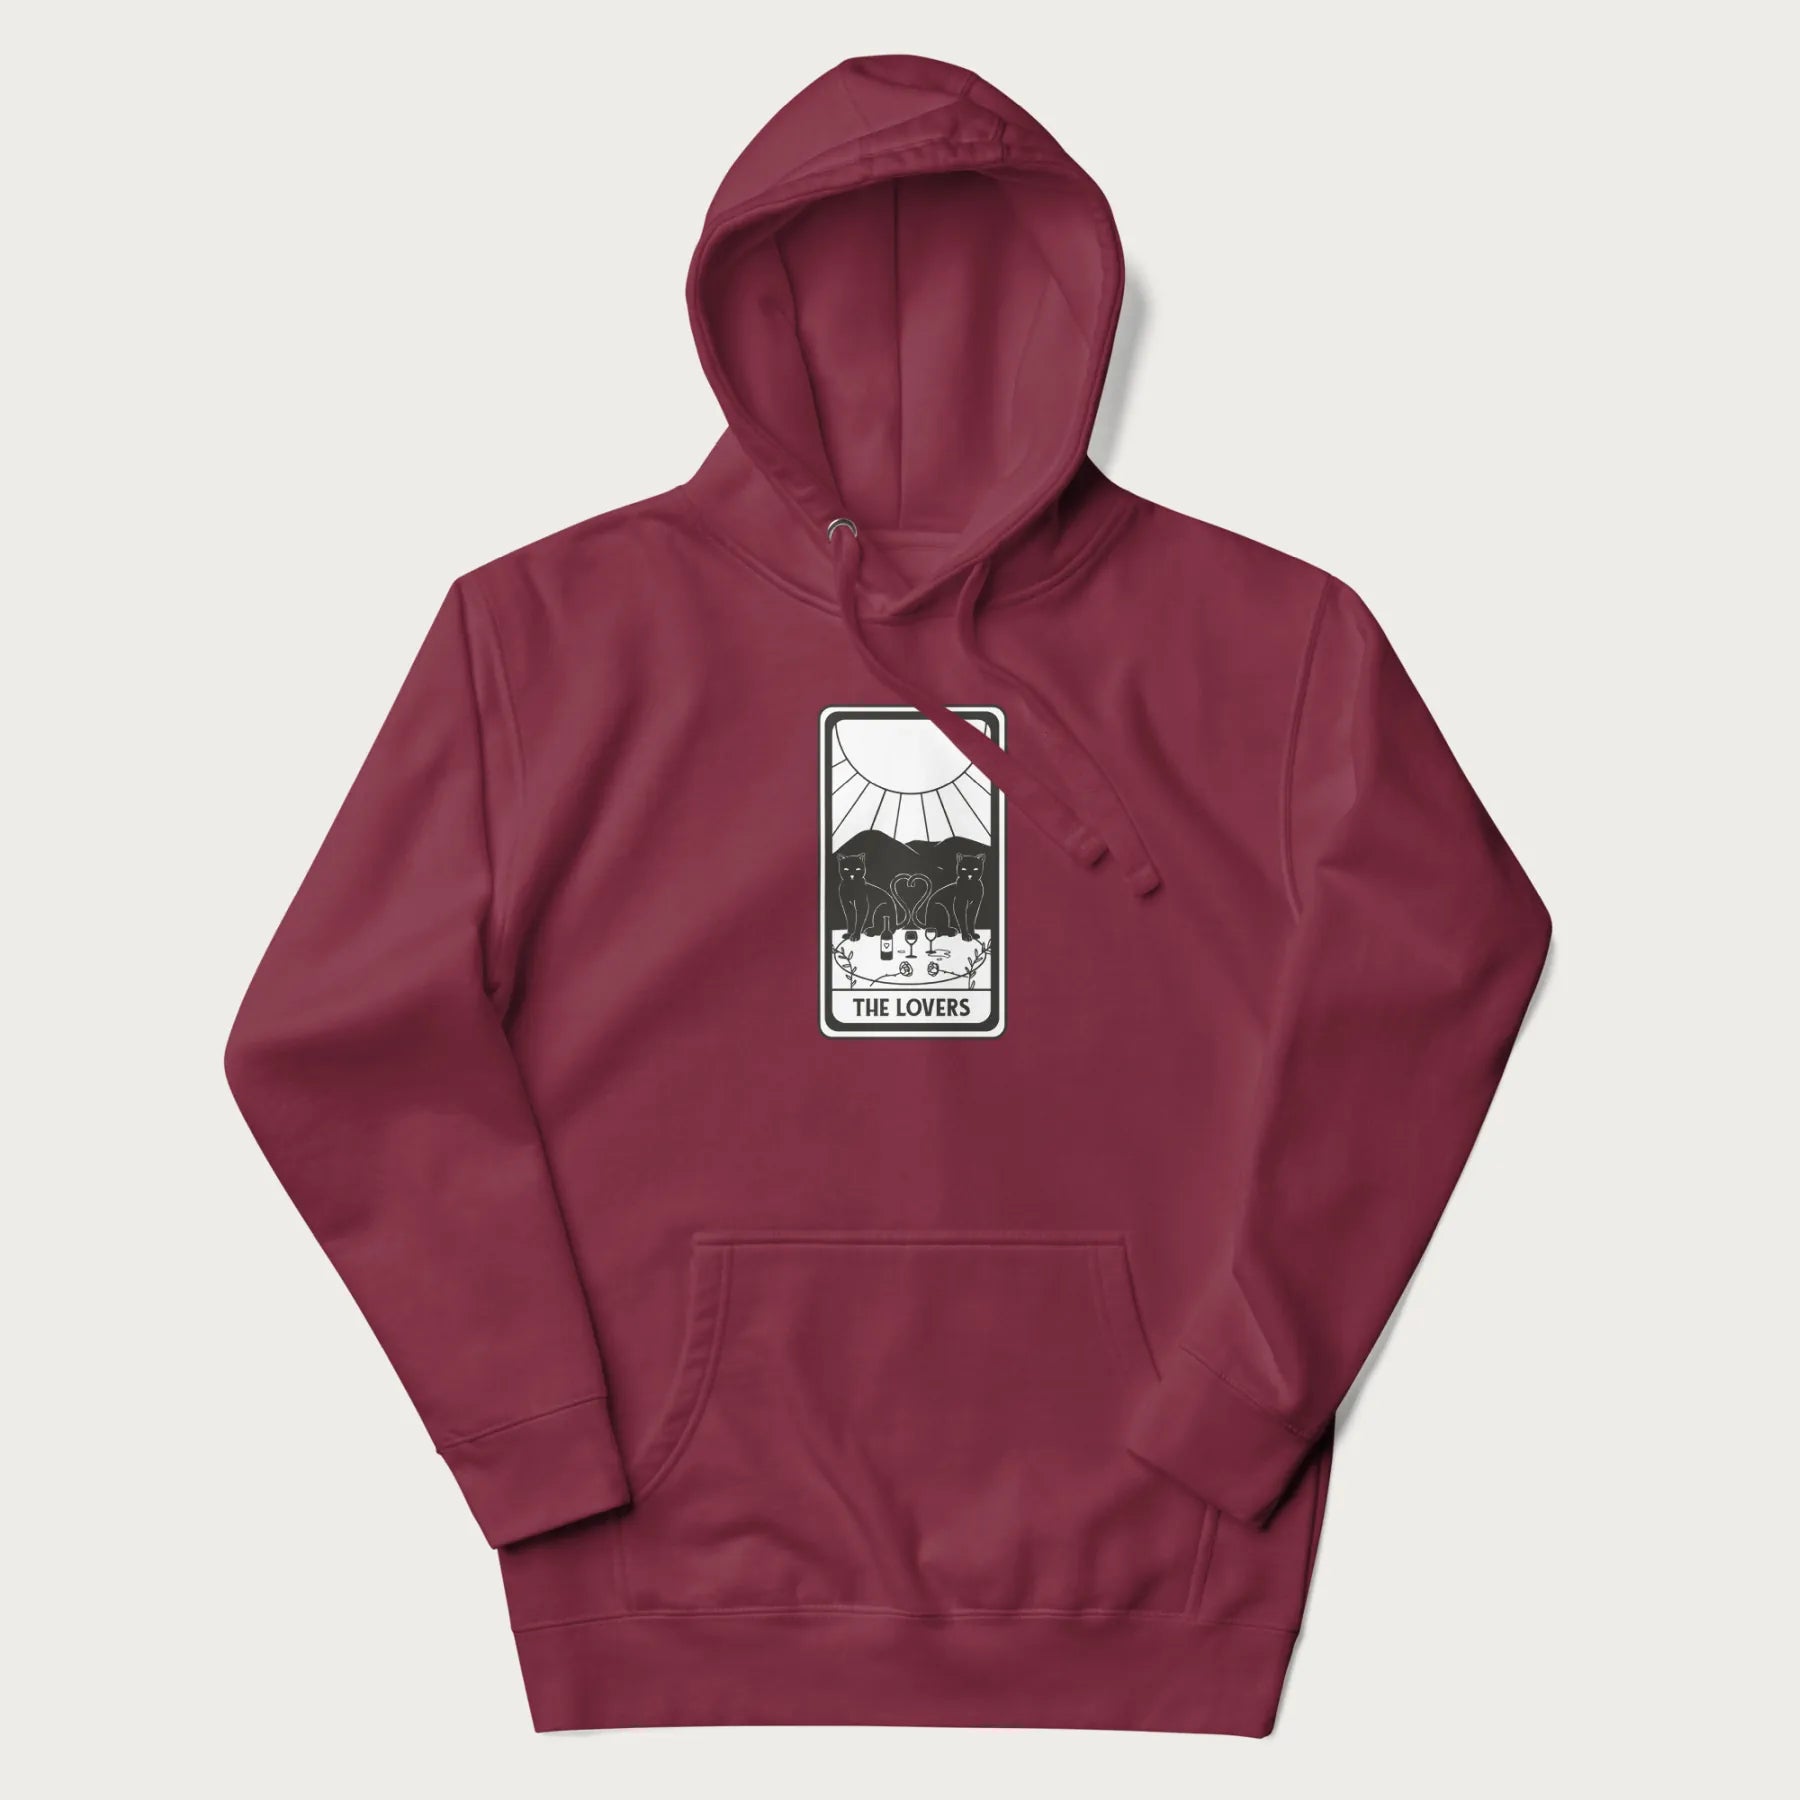 Maroon hoodie with a 'The Lovers' tarot card graphic of two cats with intertwined tails forming a heart, wine, and roses.